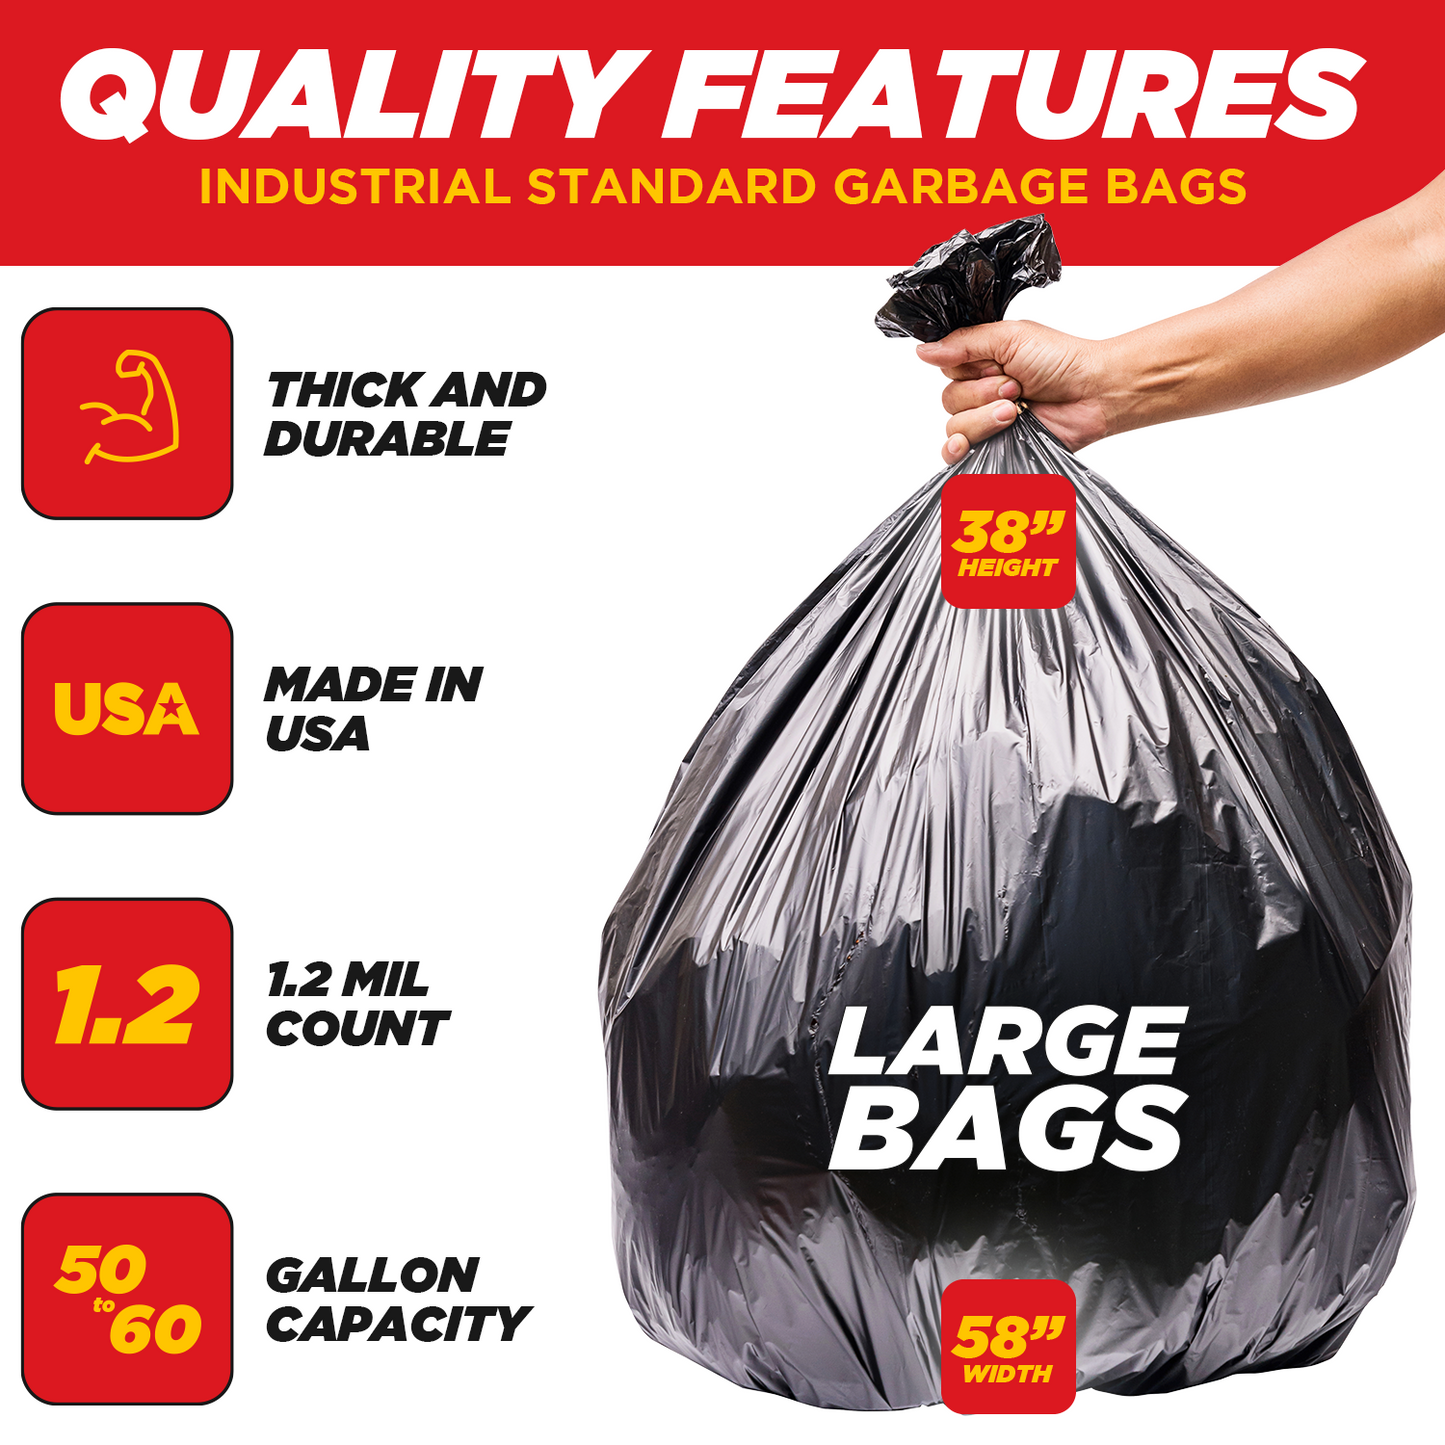 Dyno Products Online 60-Gallon, 1.2 Mil Thick Heavy-Duty Black Trash Bags - 50 Count Extra Large Plastic Garbage Liners Fit Huge Cans for Home Garden Lawn Yard Recycling Construction & Commercial Use